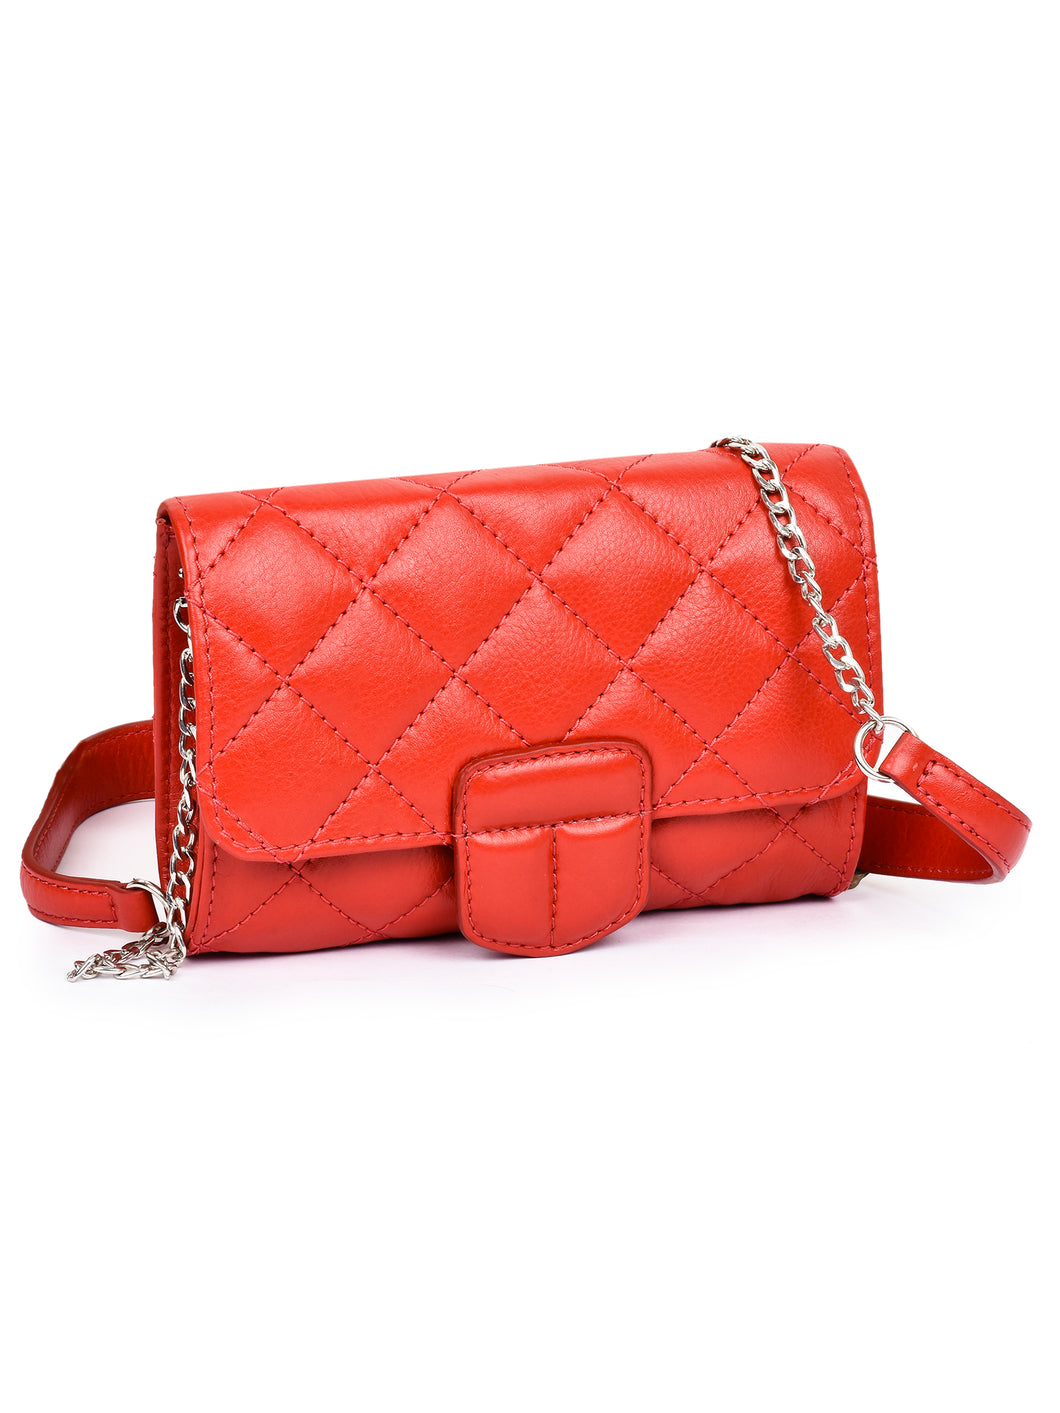 Quilted Leather Clutch